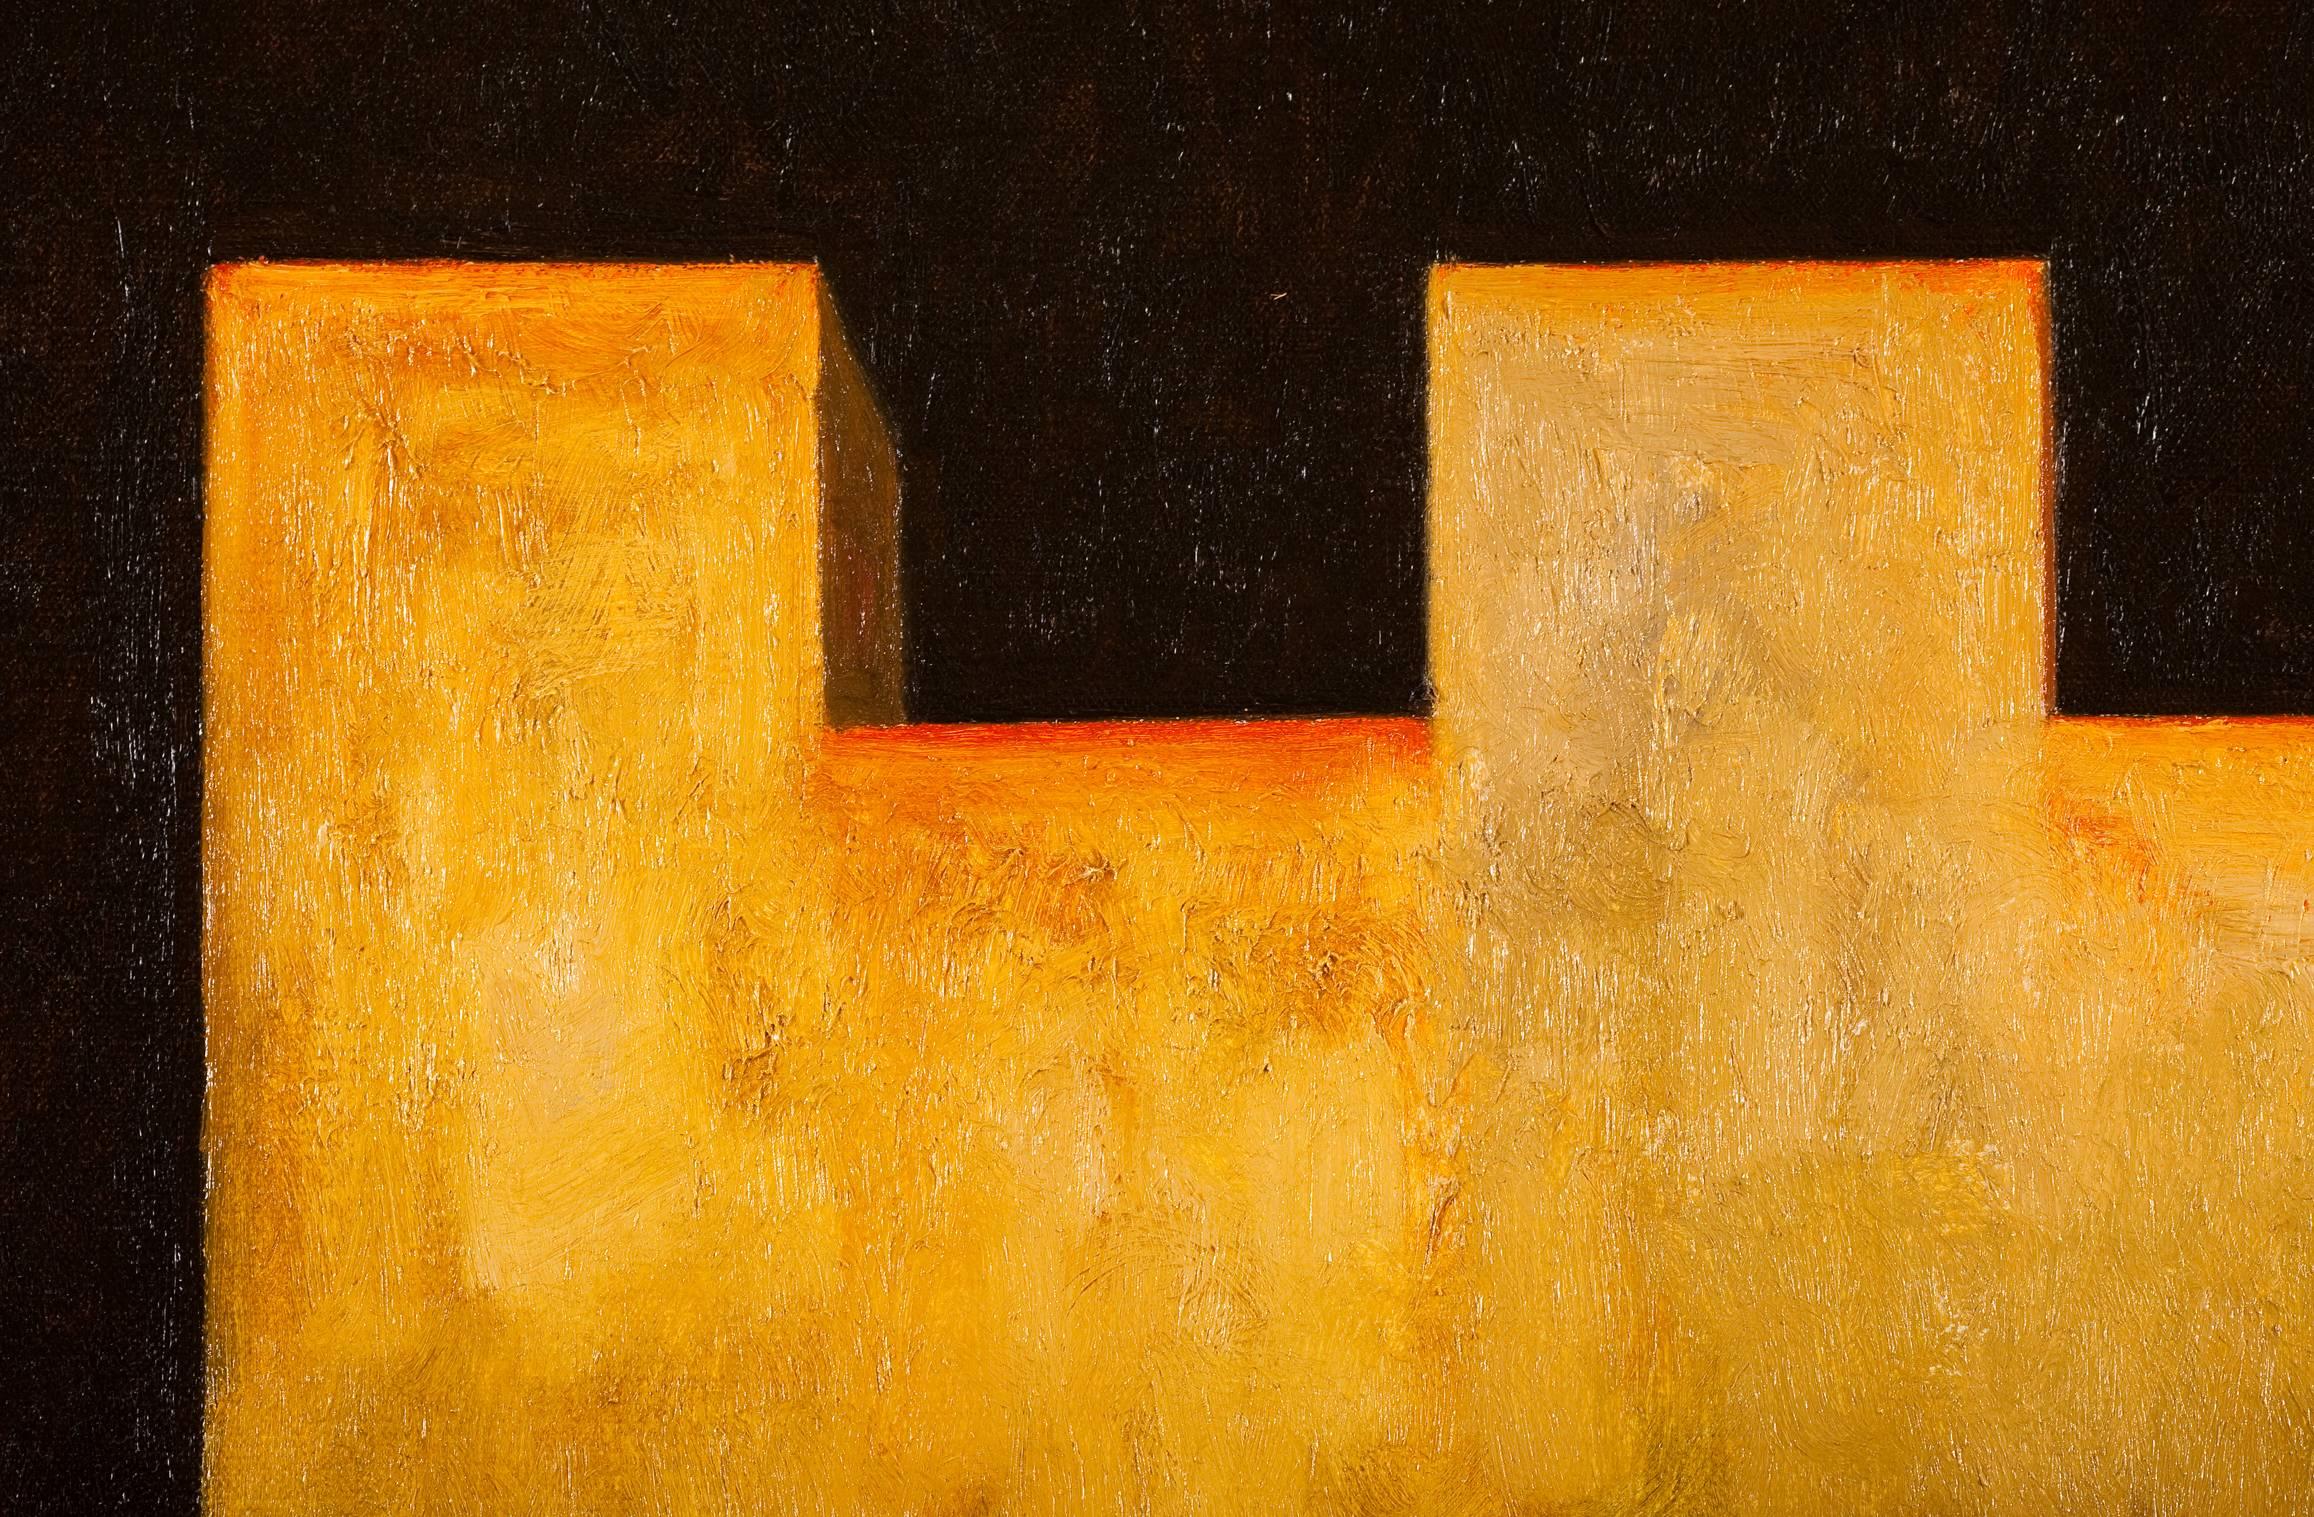 Fortress II - Orange Abstract Painting by Edward Rice